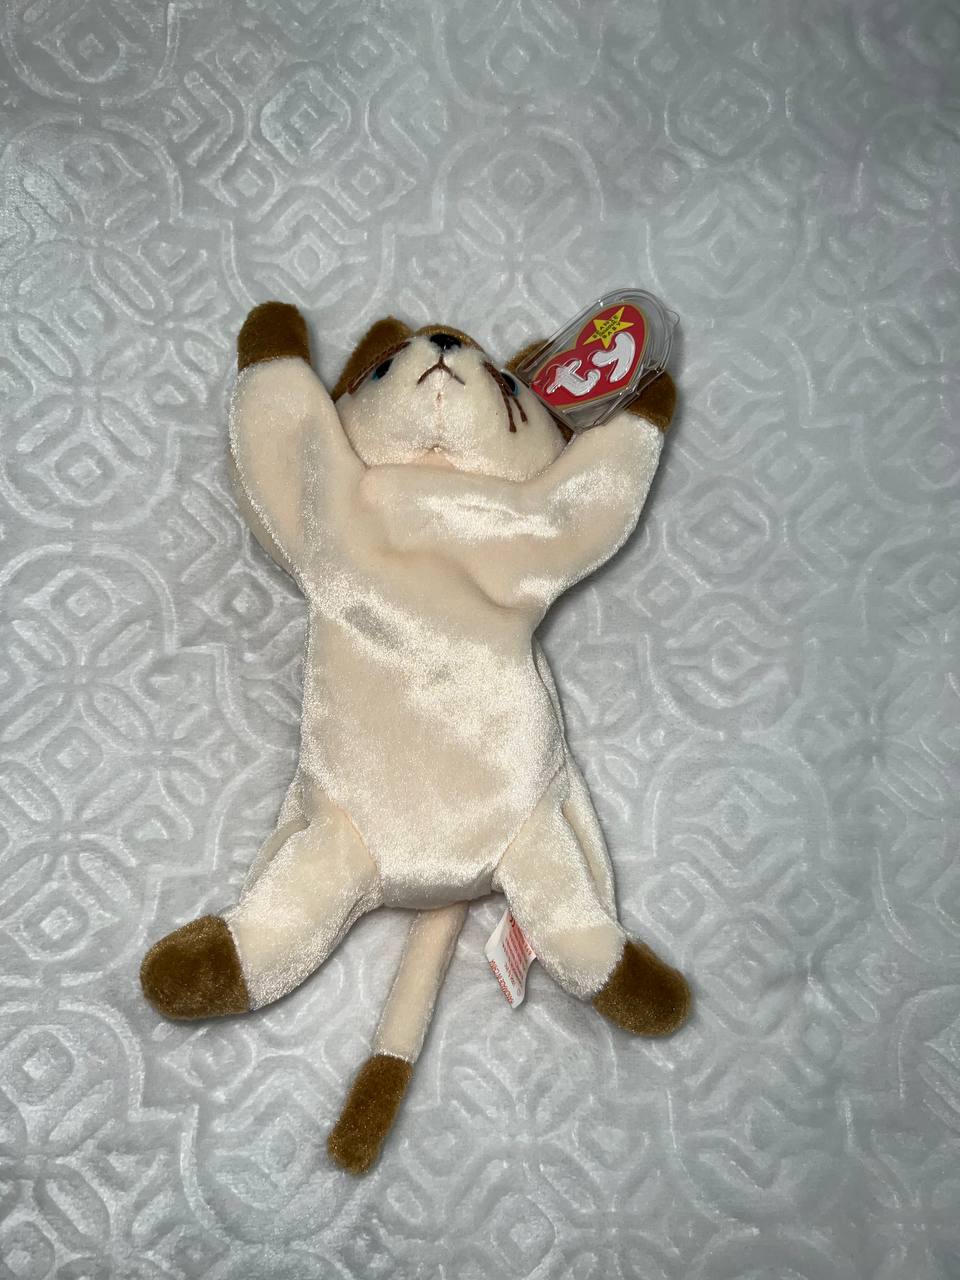 *RARE* MINT Snip 1996 Beanie Baby With Tag in Pristine Condition